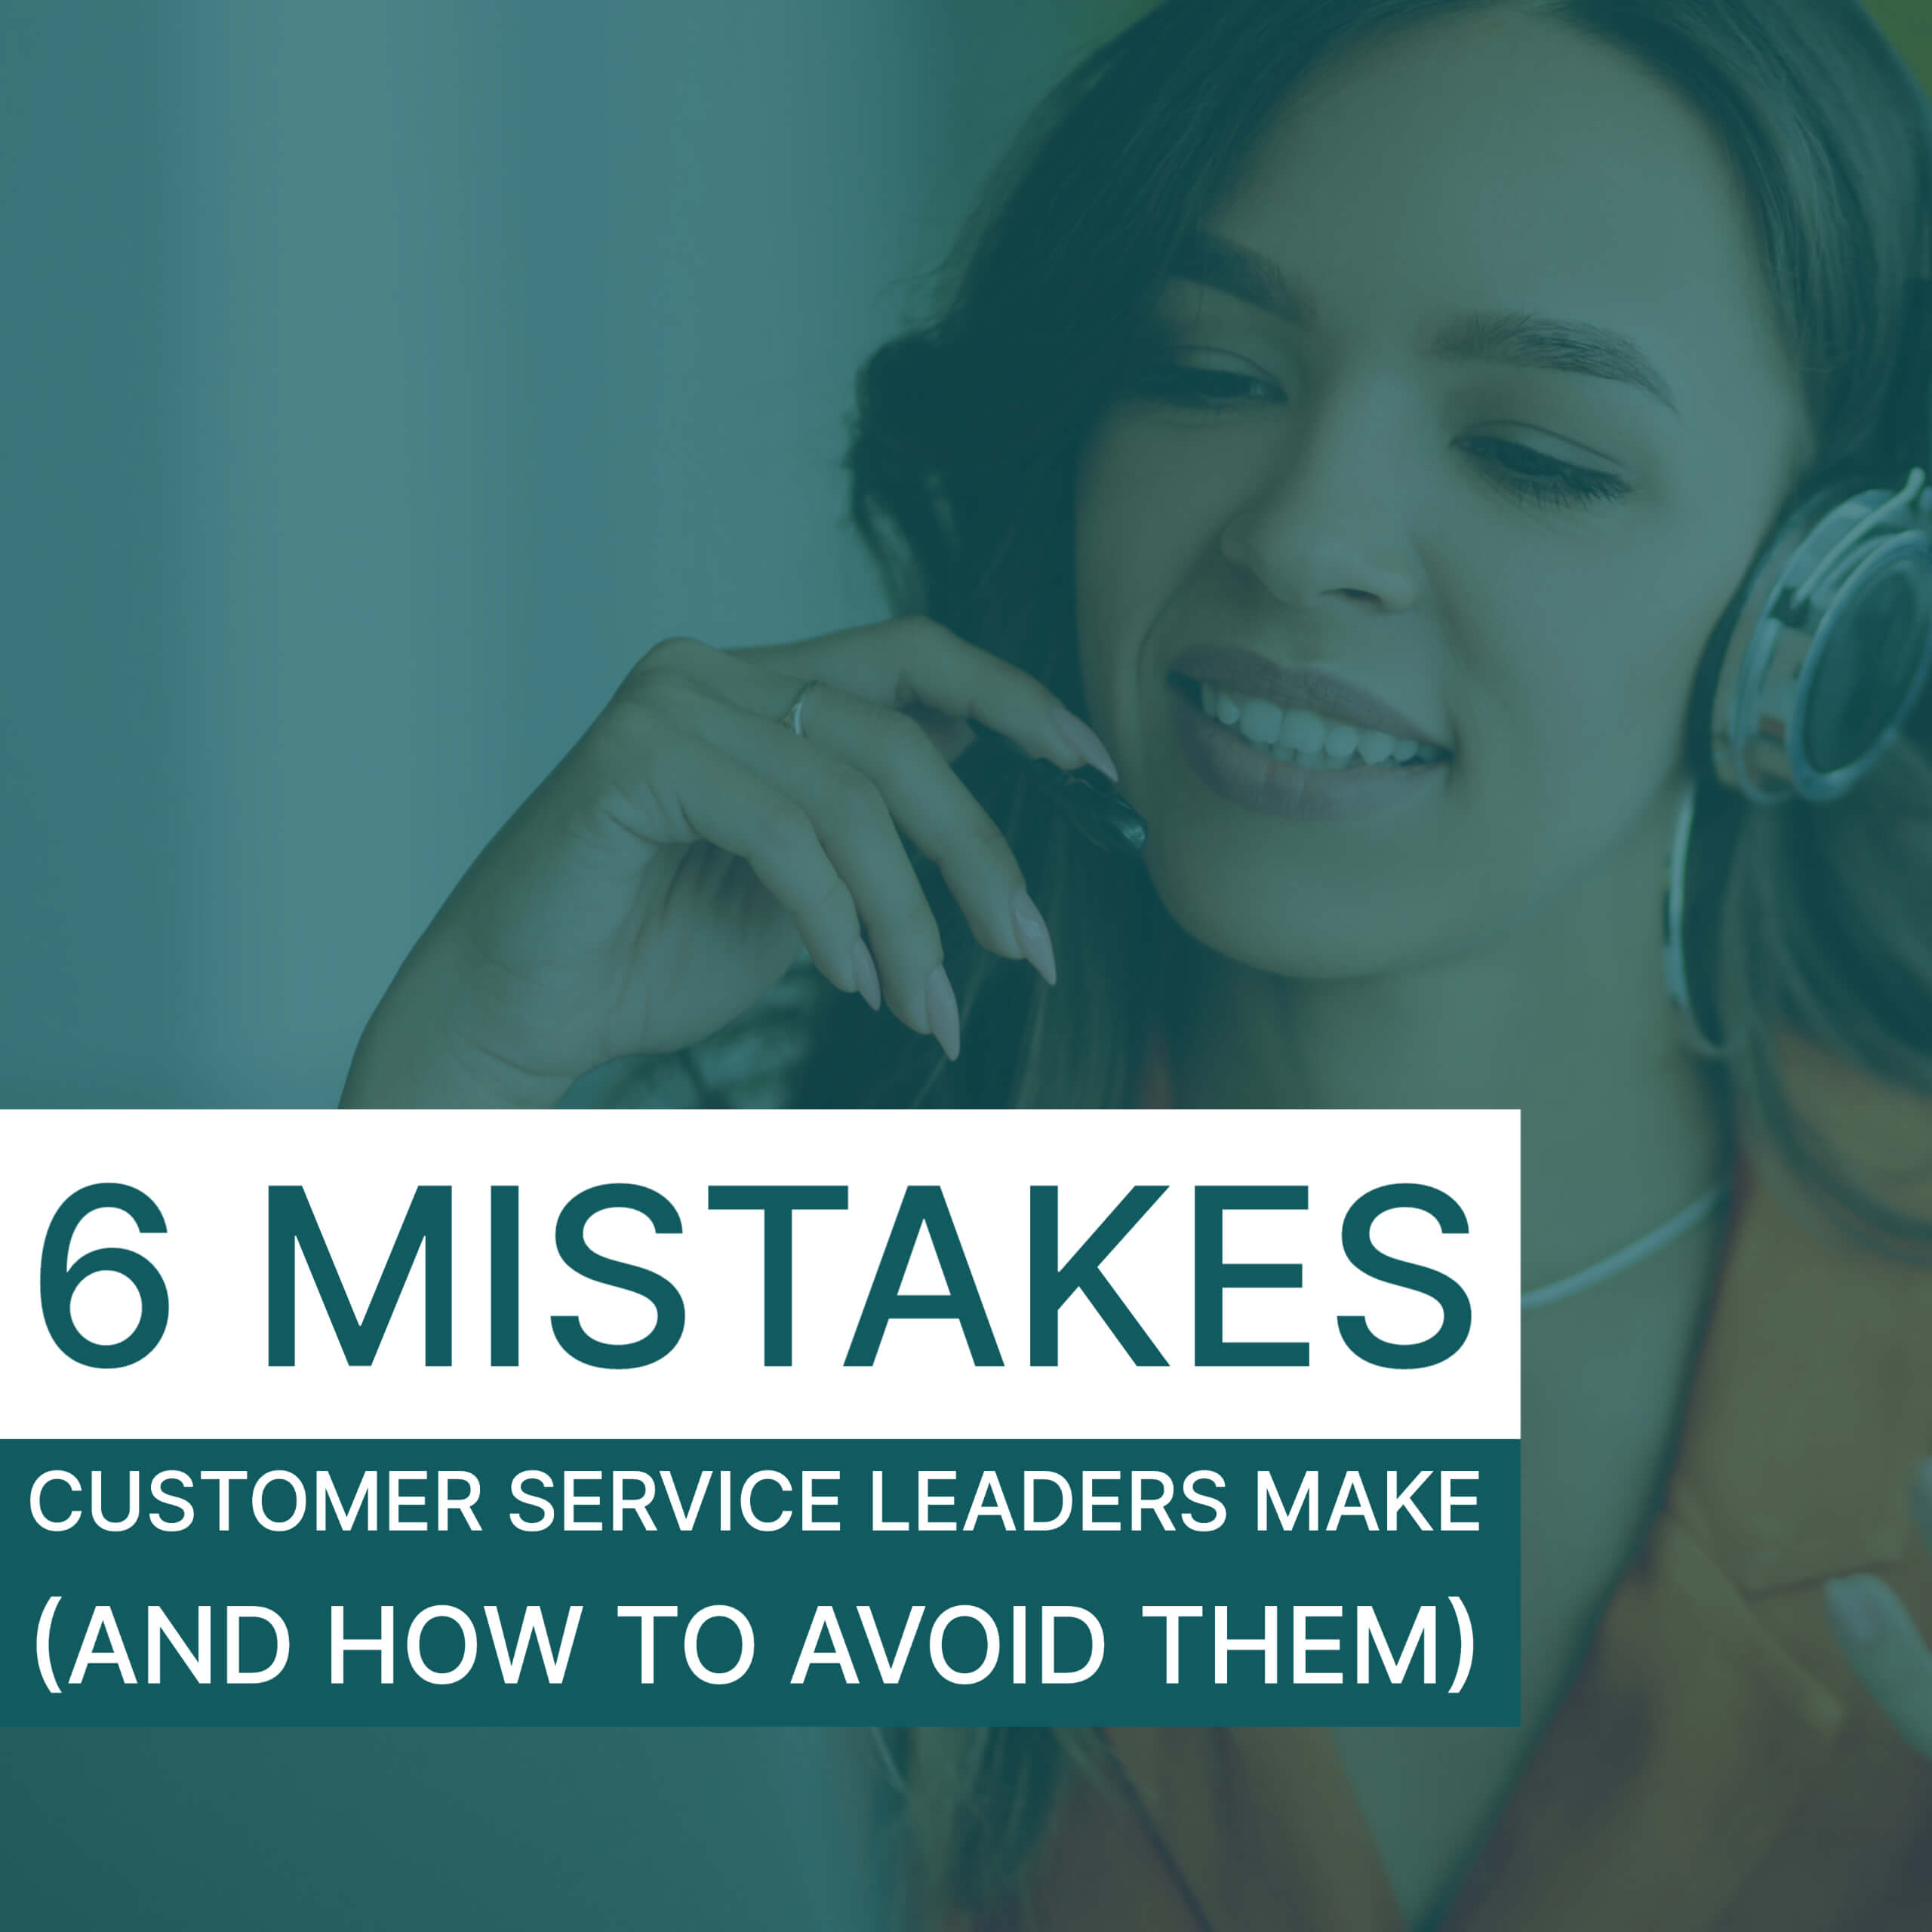 6 biggest mistakes customer service leaders make and how to avoid them on a blue background with a woman on a headset.